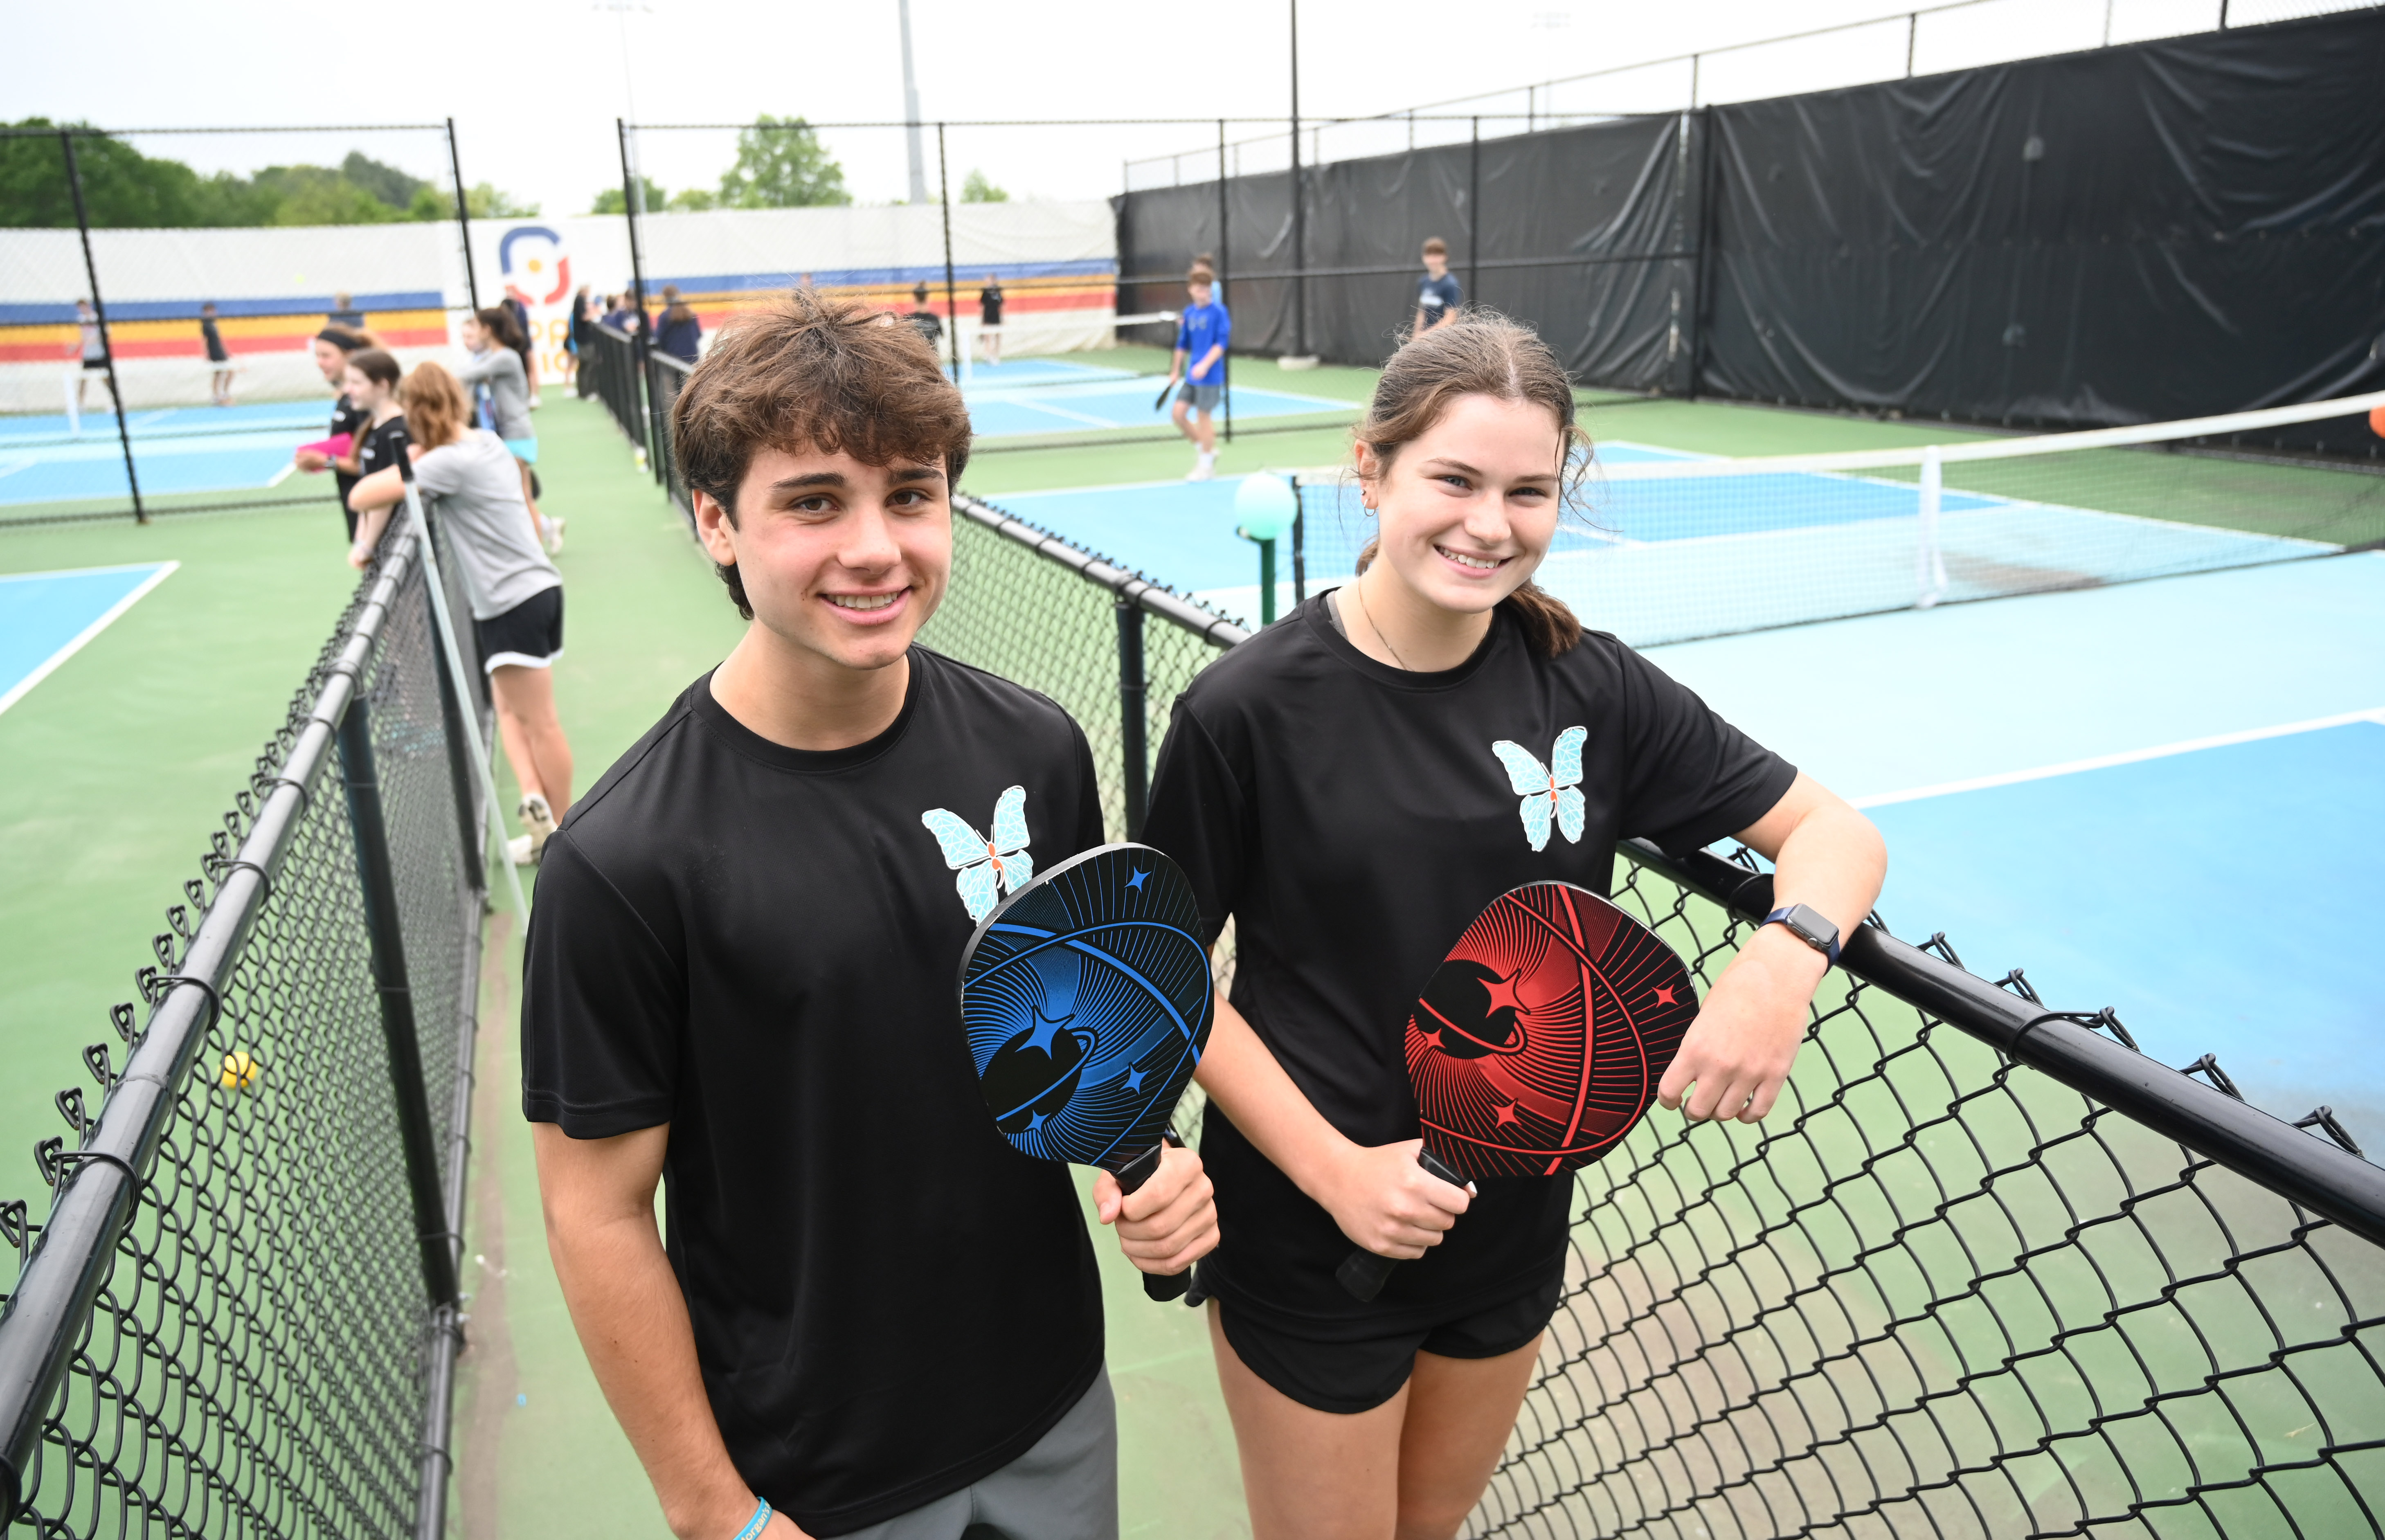 Manchester Valley High School juniors Brady Bonney and Leigh Hoke are seen during the pickleball tournament they organized at Coppermine 4 Seasons, in support of Morgan's Message, a non-profit supporting student-athlete mental health initiatives. (Brian Krista/staff photo)